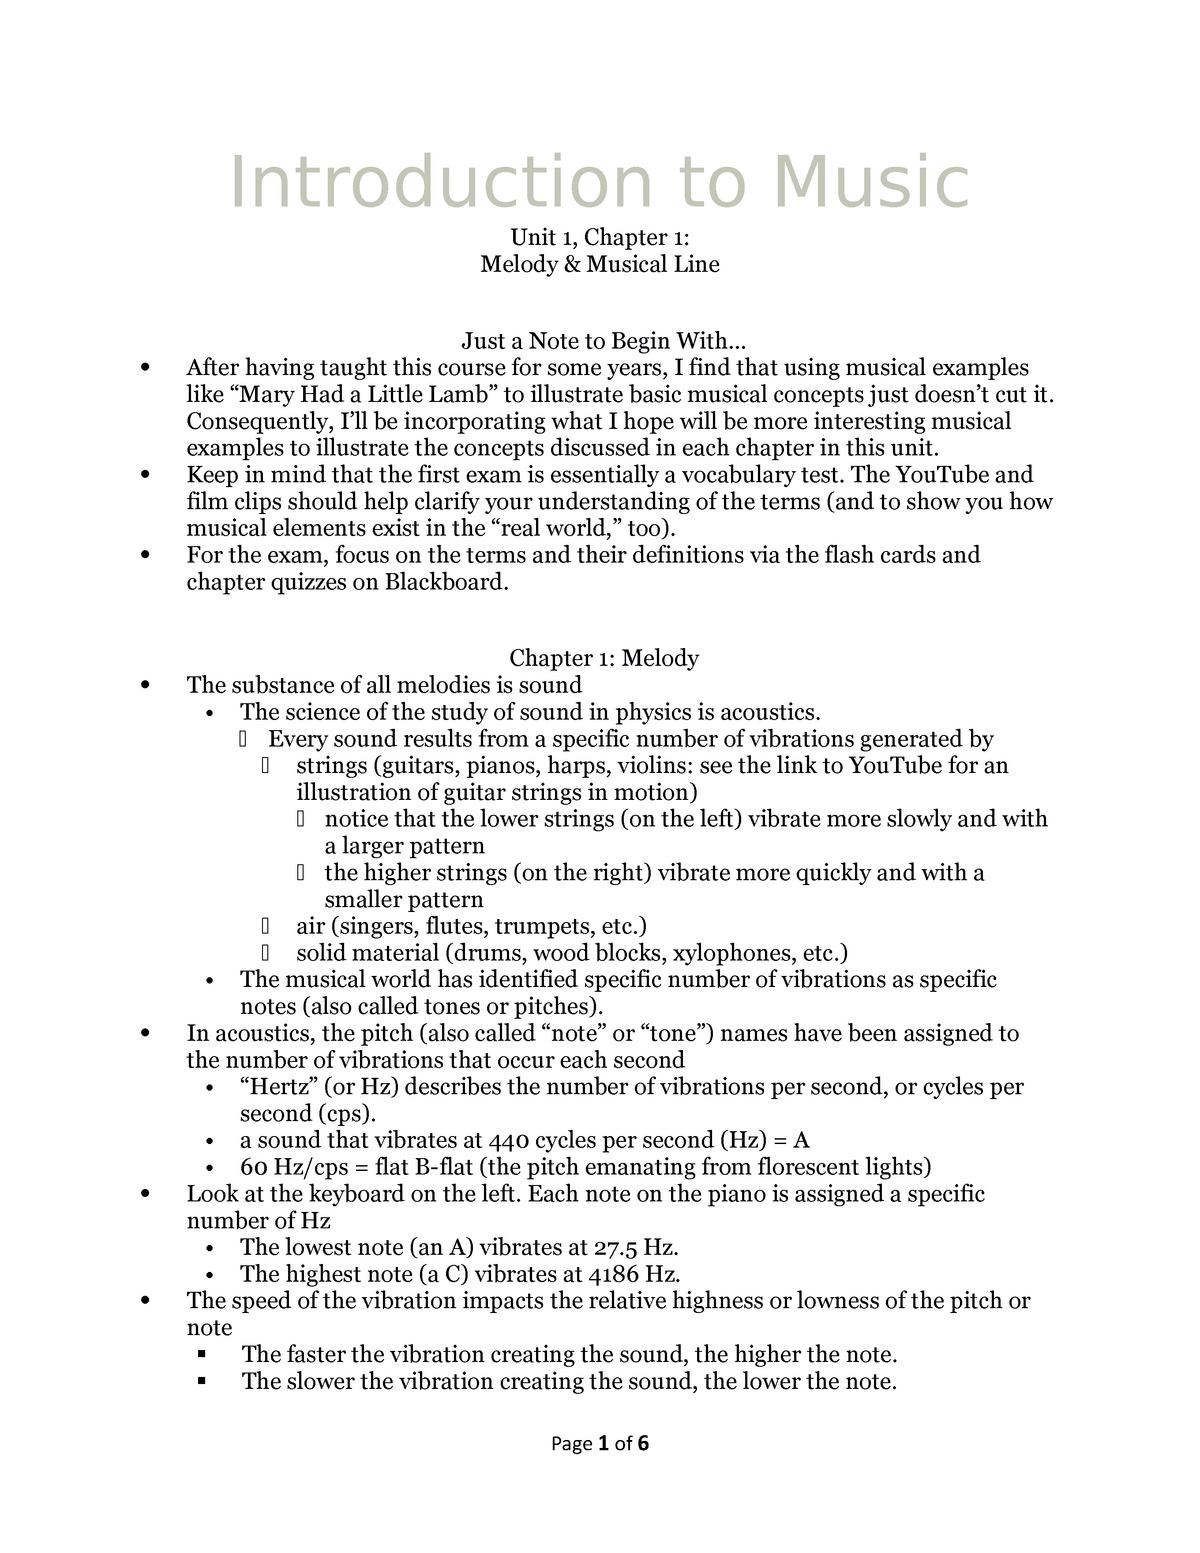 Ch01 melody - Introduction to Music Unit 1, Chapter 1: Melody & Musical ...